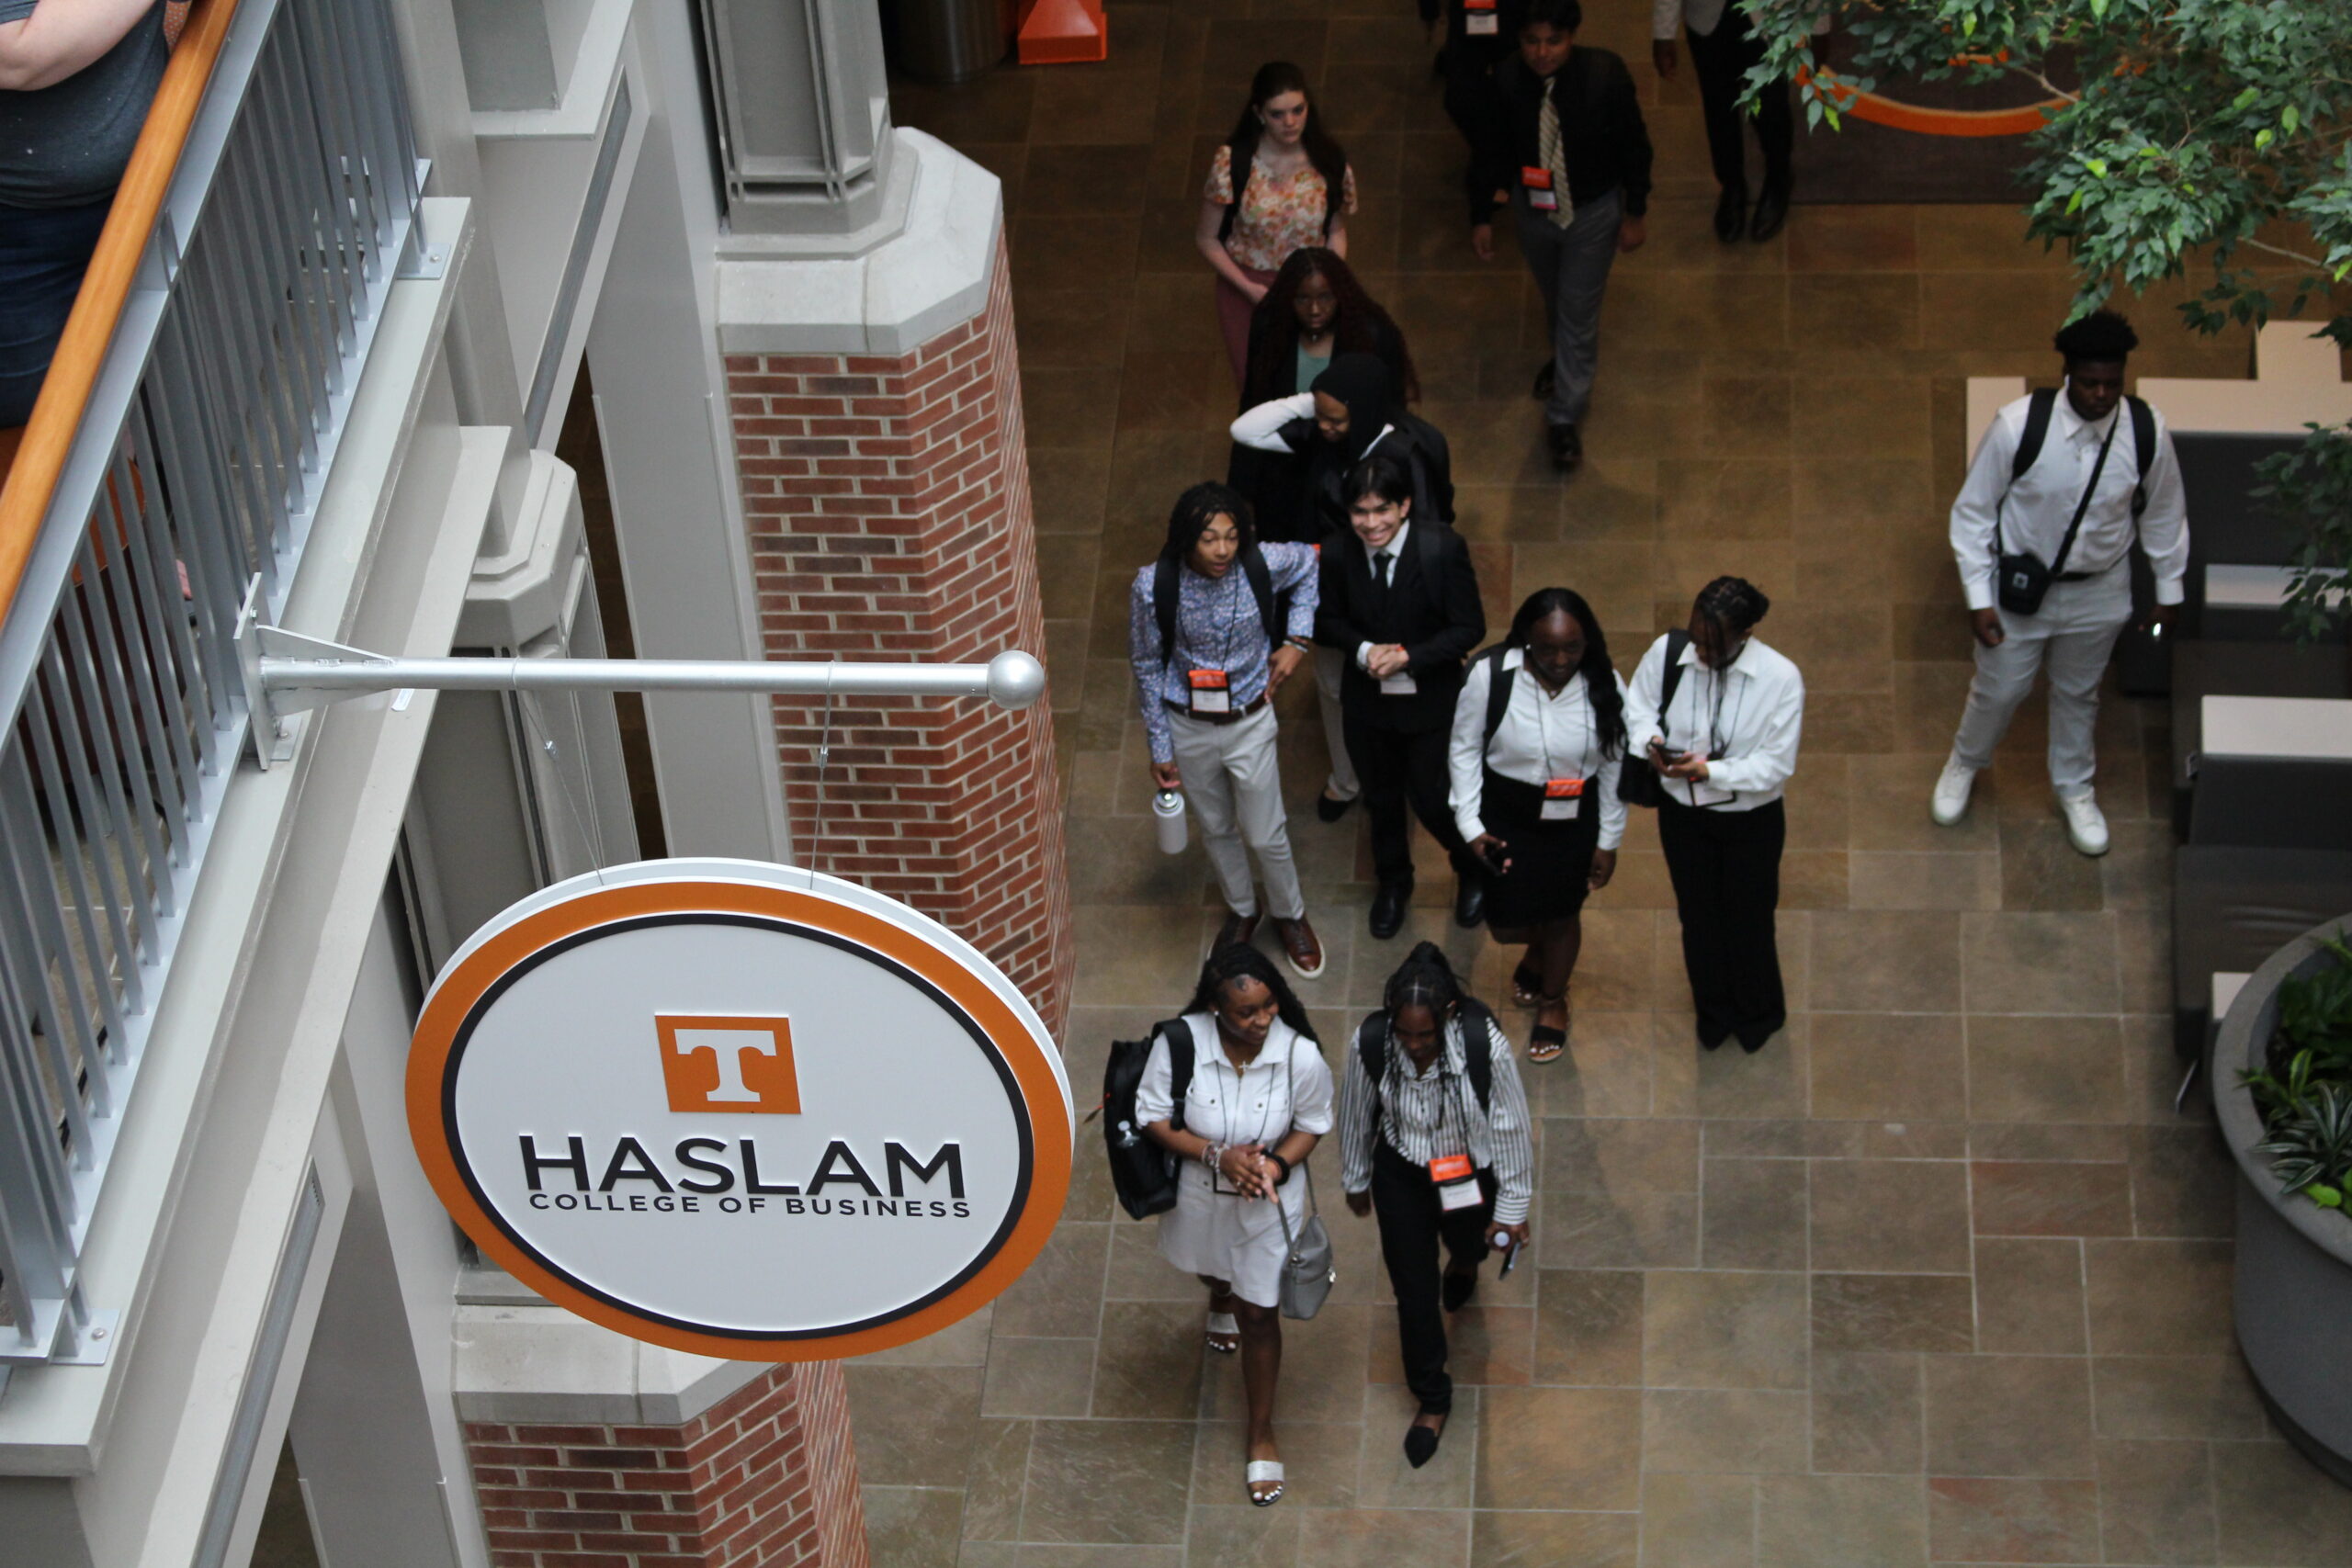 Students walking in the atrium with Haslam sign